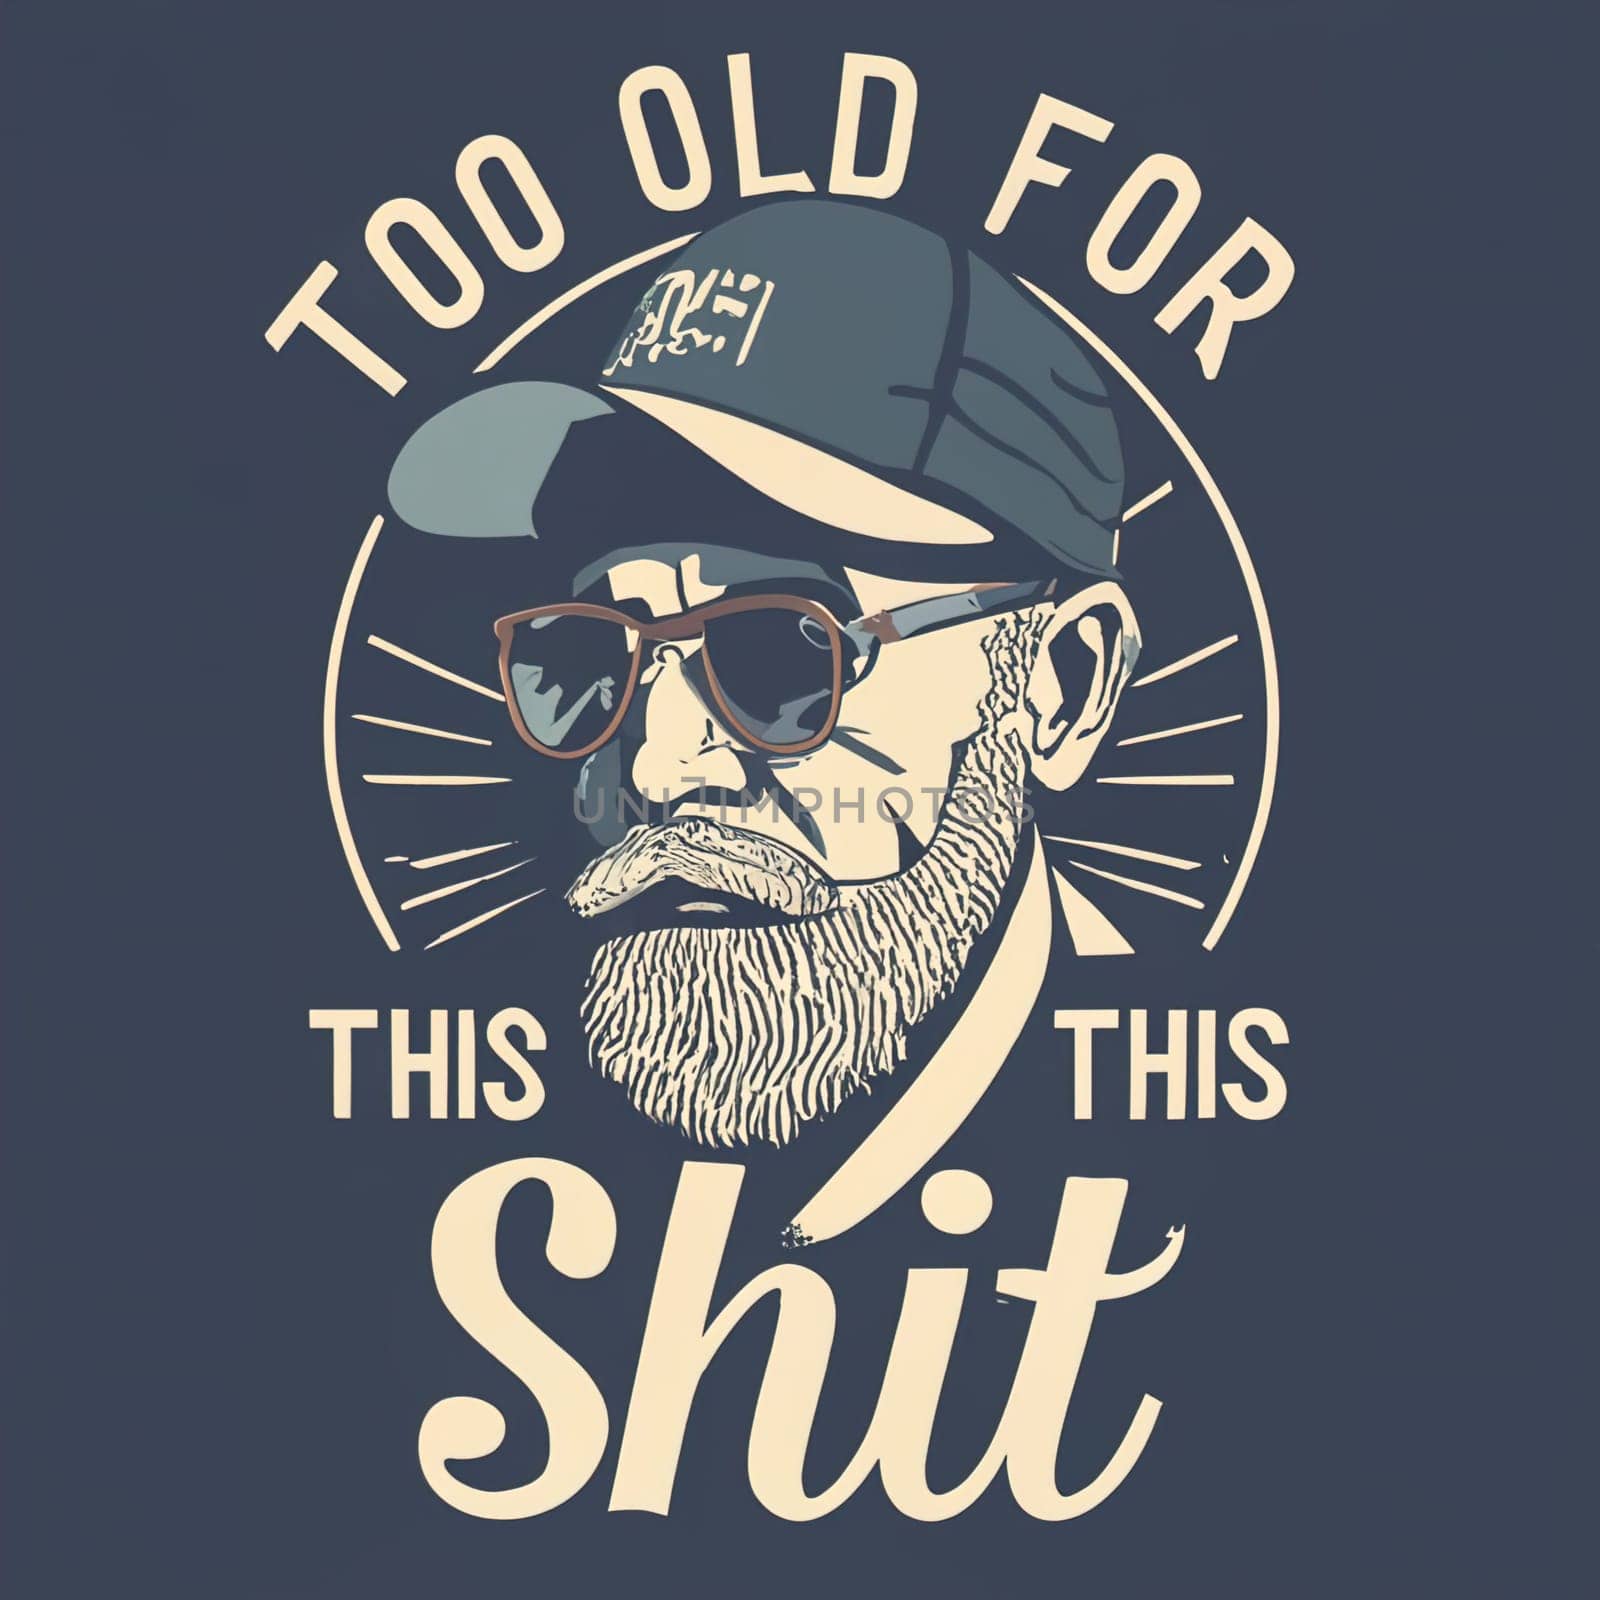 T-Shirt Design: 'Too Old for This' - Minimalist Old Man with Beard, Ray-Ban Glasses, Trucker Cap on Black Background by igor010